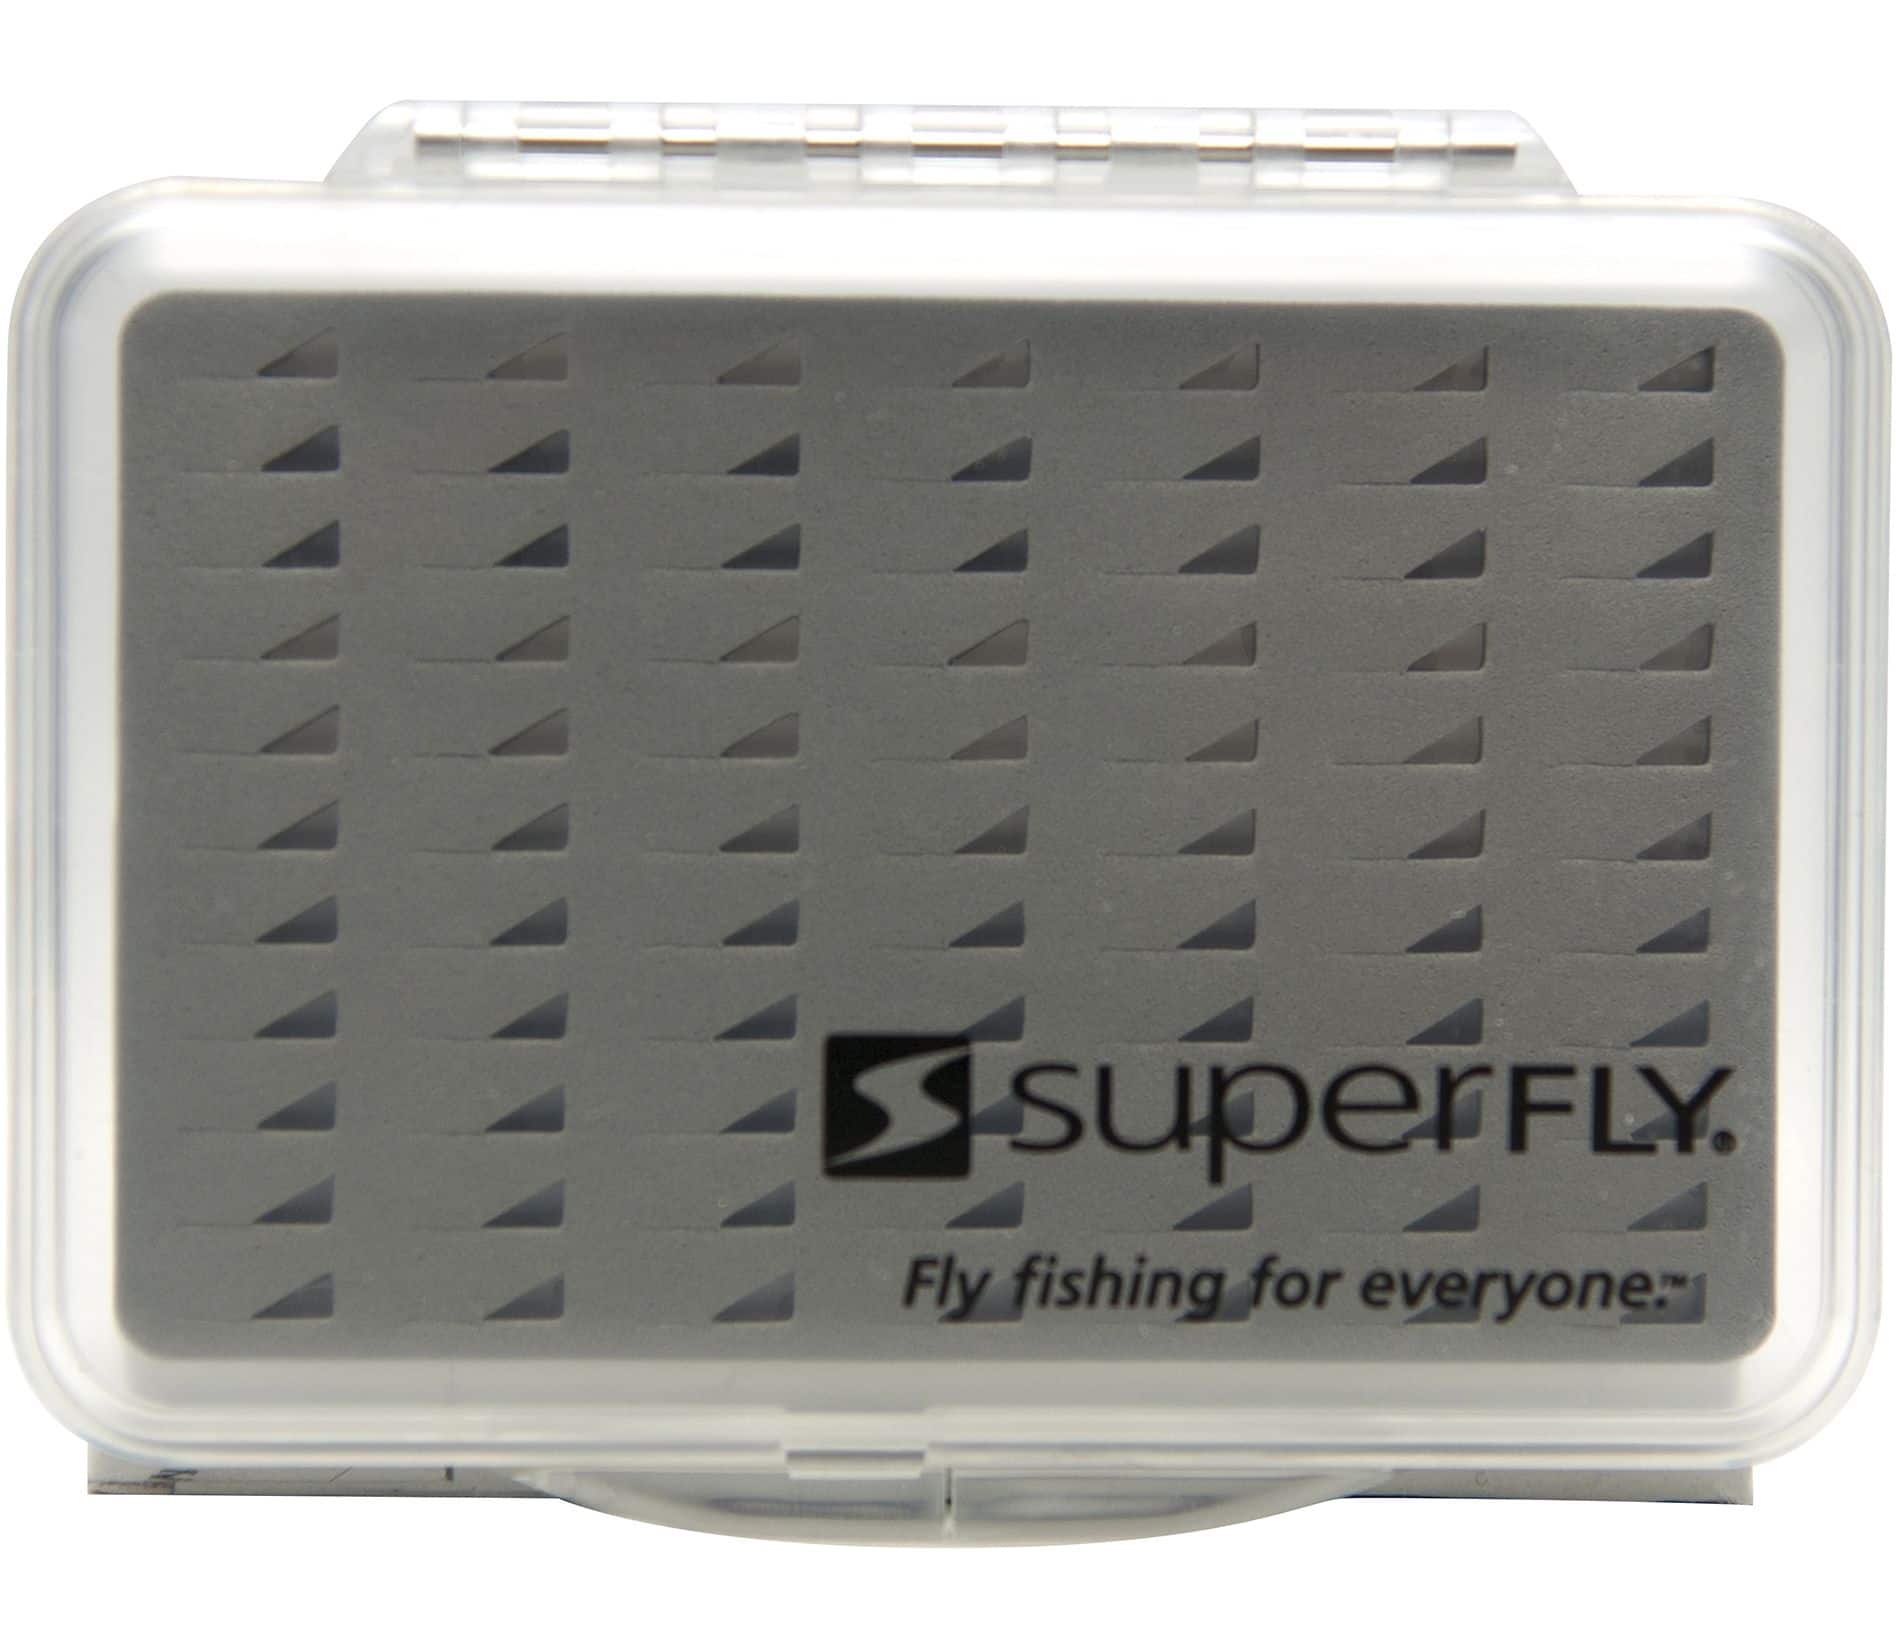 https://media-www.canadiantire.ca/product/playing/fishing/fishing-equipment/1784019/superfly-fly-box-clear-trifoam-small-5a11ffd7-7b48-4d0e-bbc9-7bf1332b177c-jpgrendition.jpg